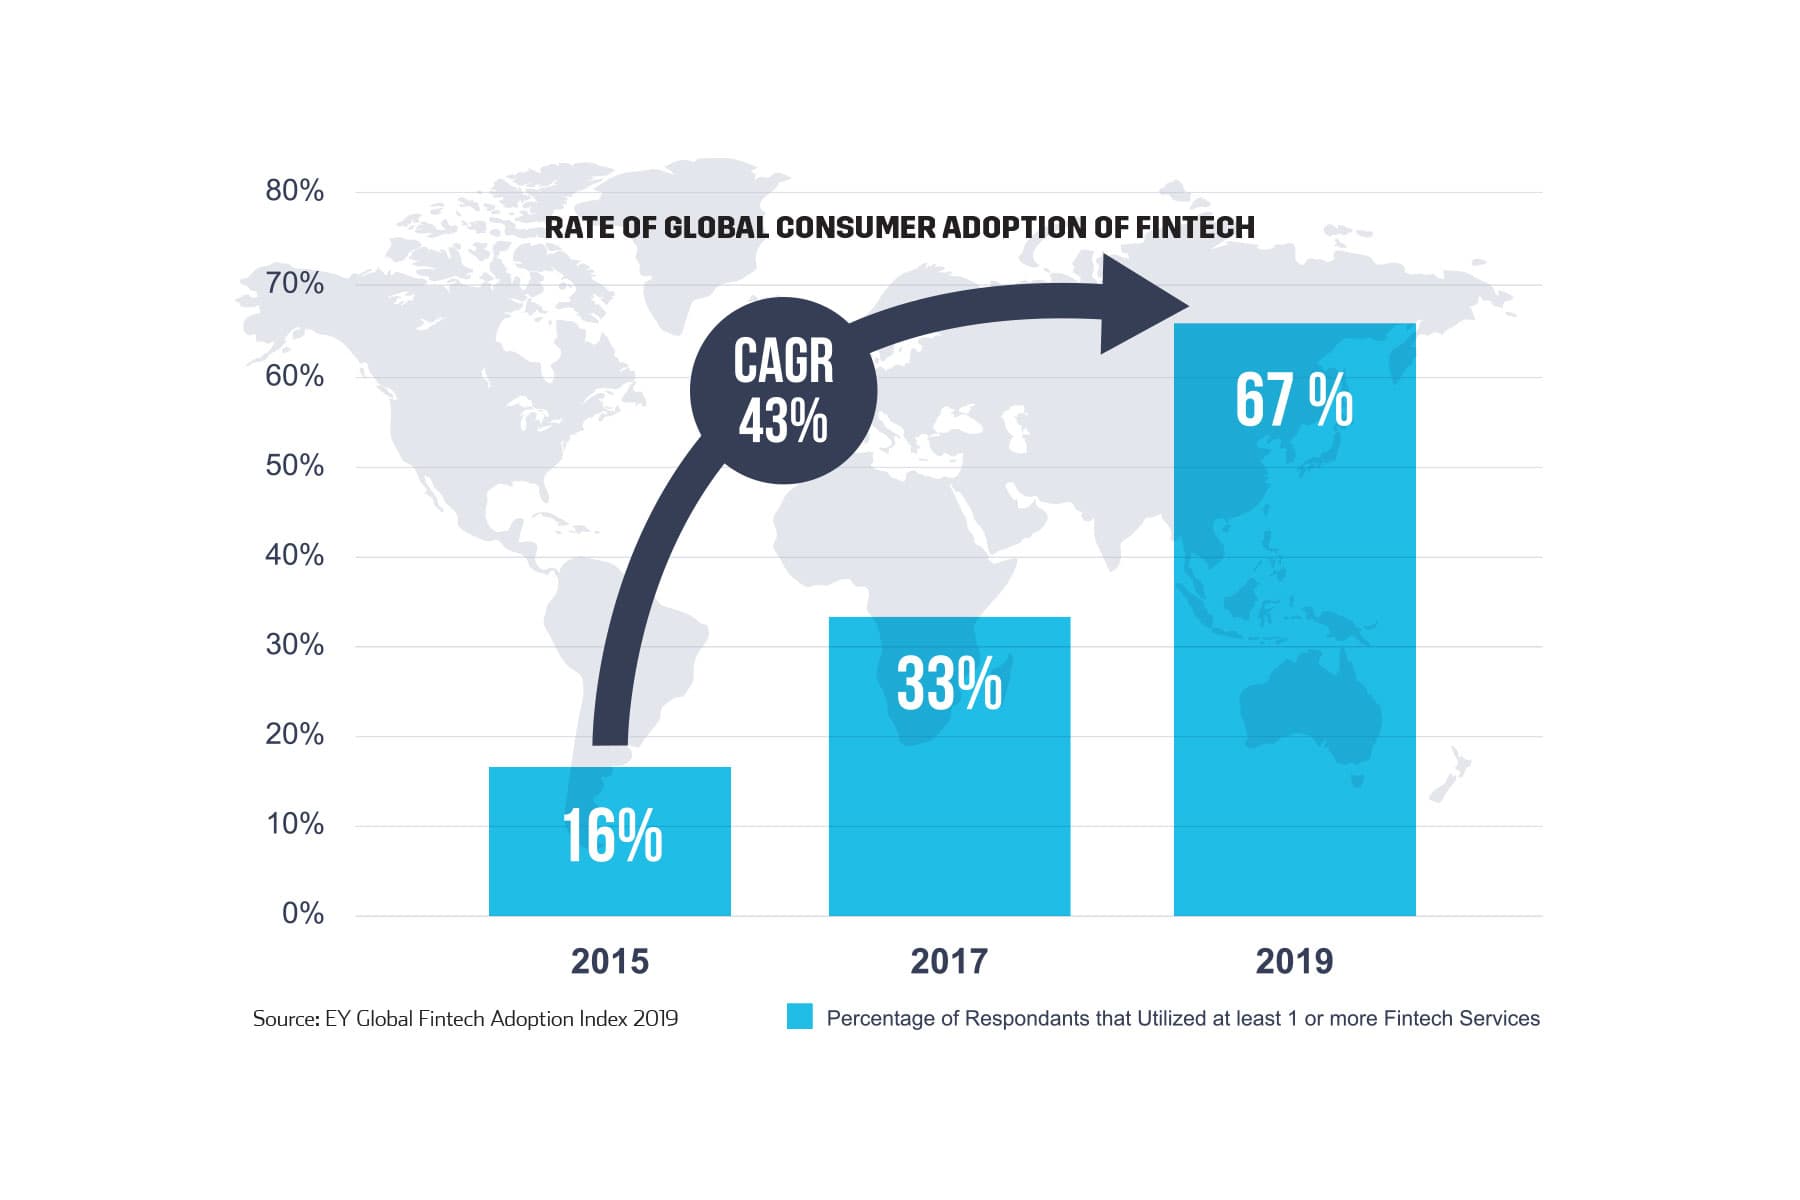 Rate of global consumer adoption of fintech